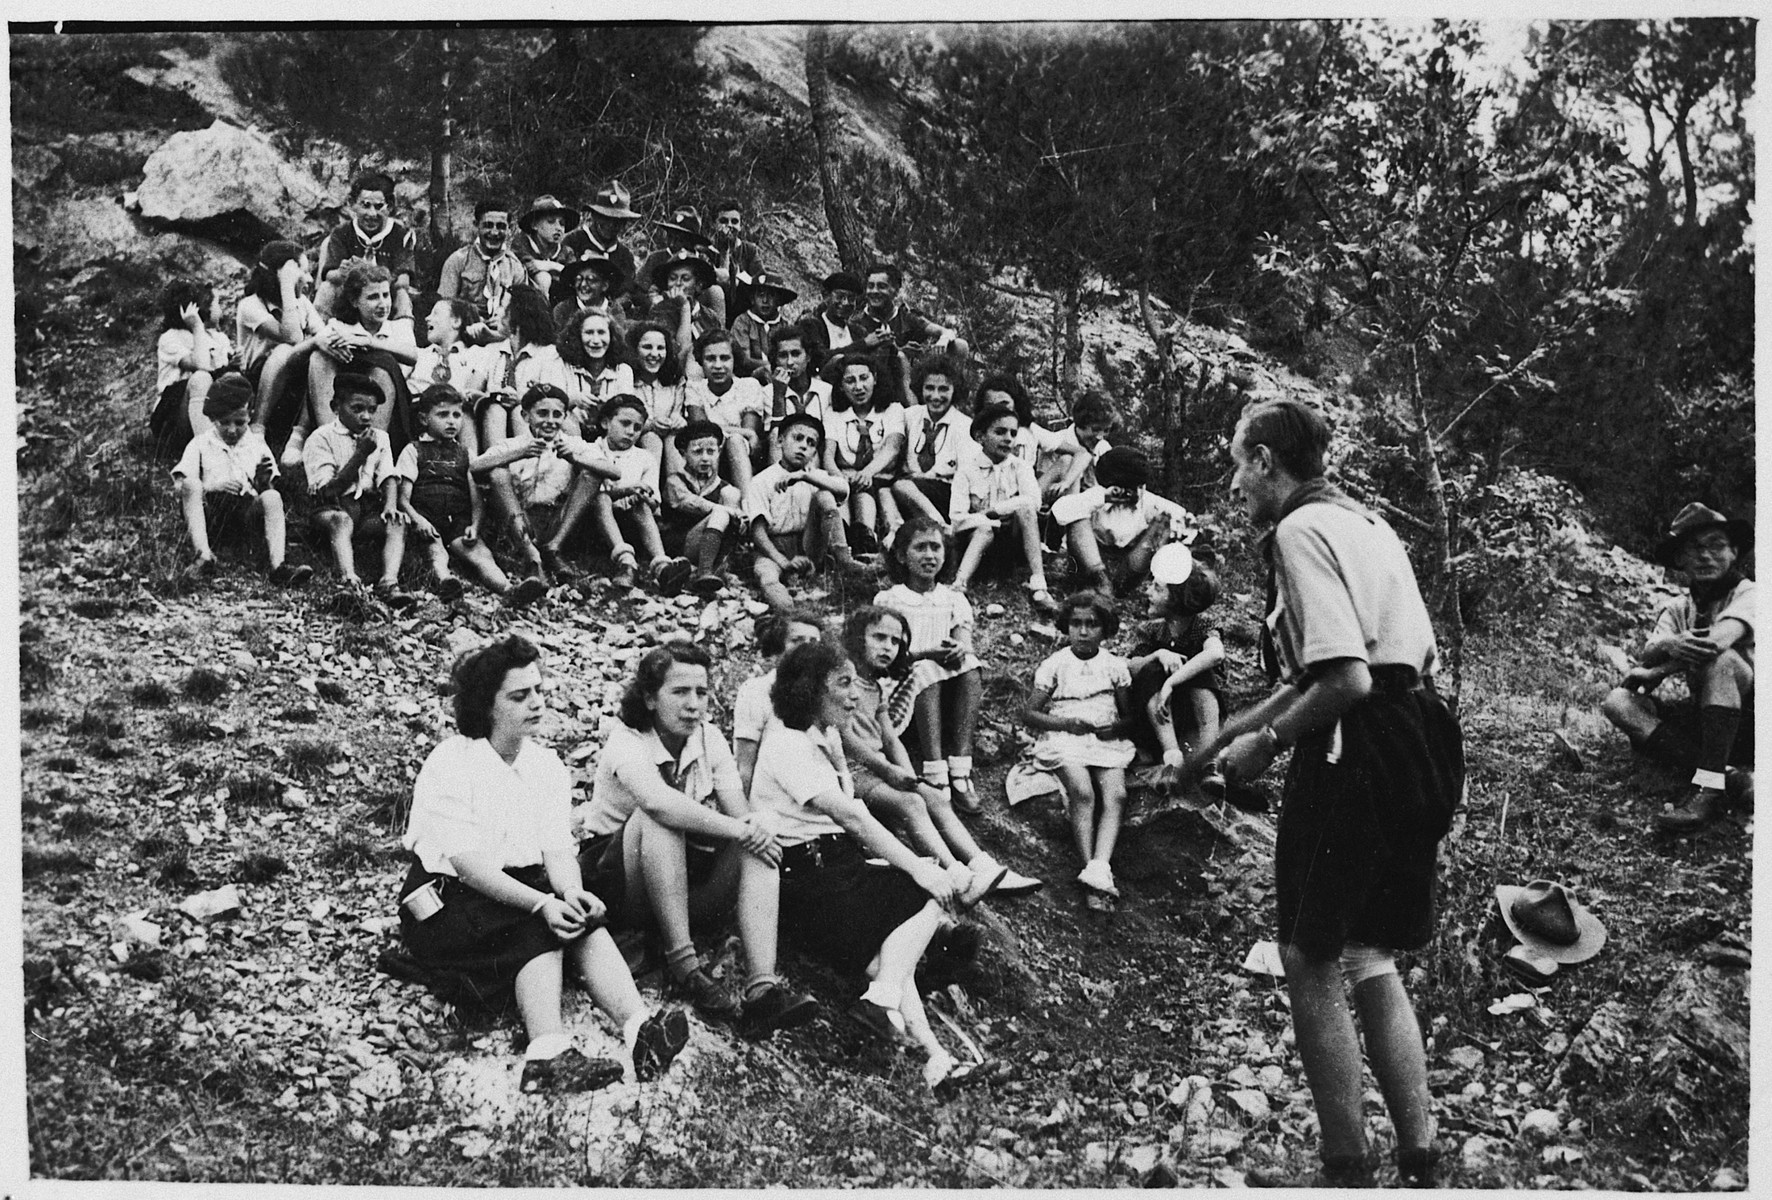 Robert Gamzon (Castor) addresses a group of the Eclaireurs Israelites de France (Jewish Scouts) who are seated on a hillside.